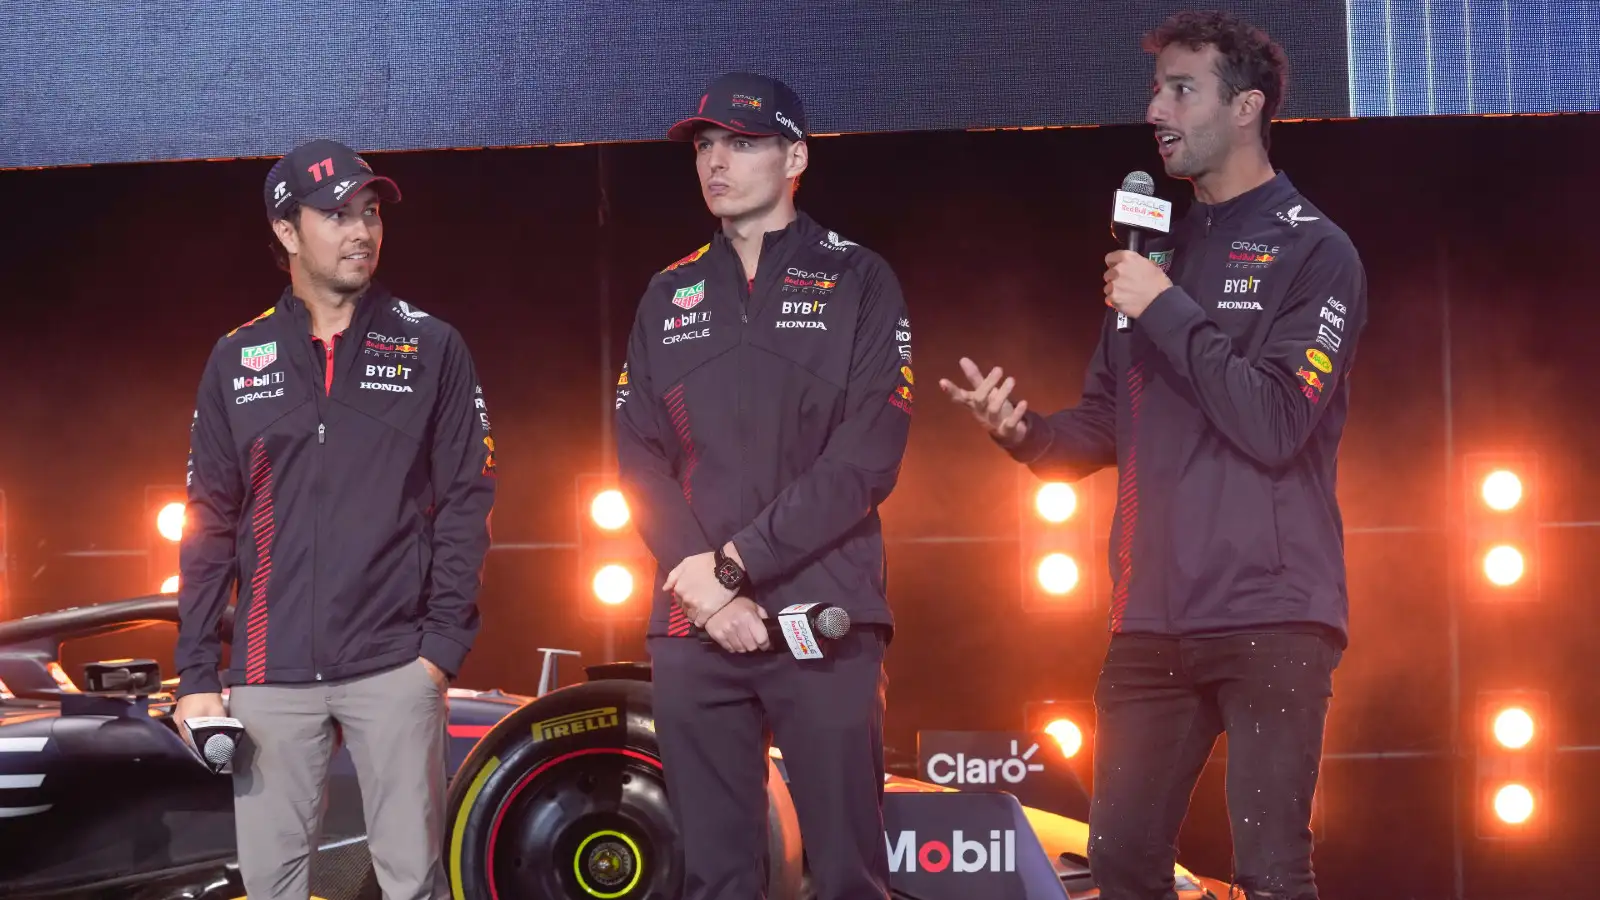 Red Bull F1 race drivers Sergio Perez and Max Verstappen look on as Red Bull reserve Daniel Ricciardo speaks at an event in early 2023.